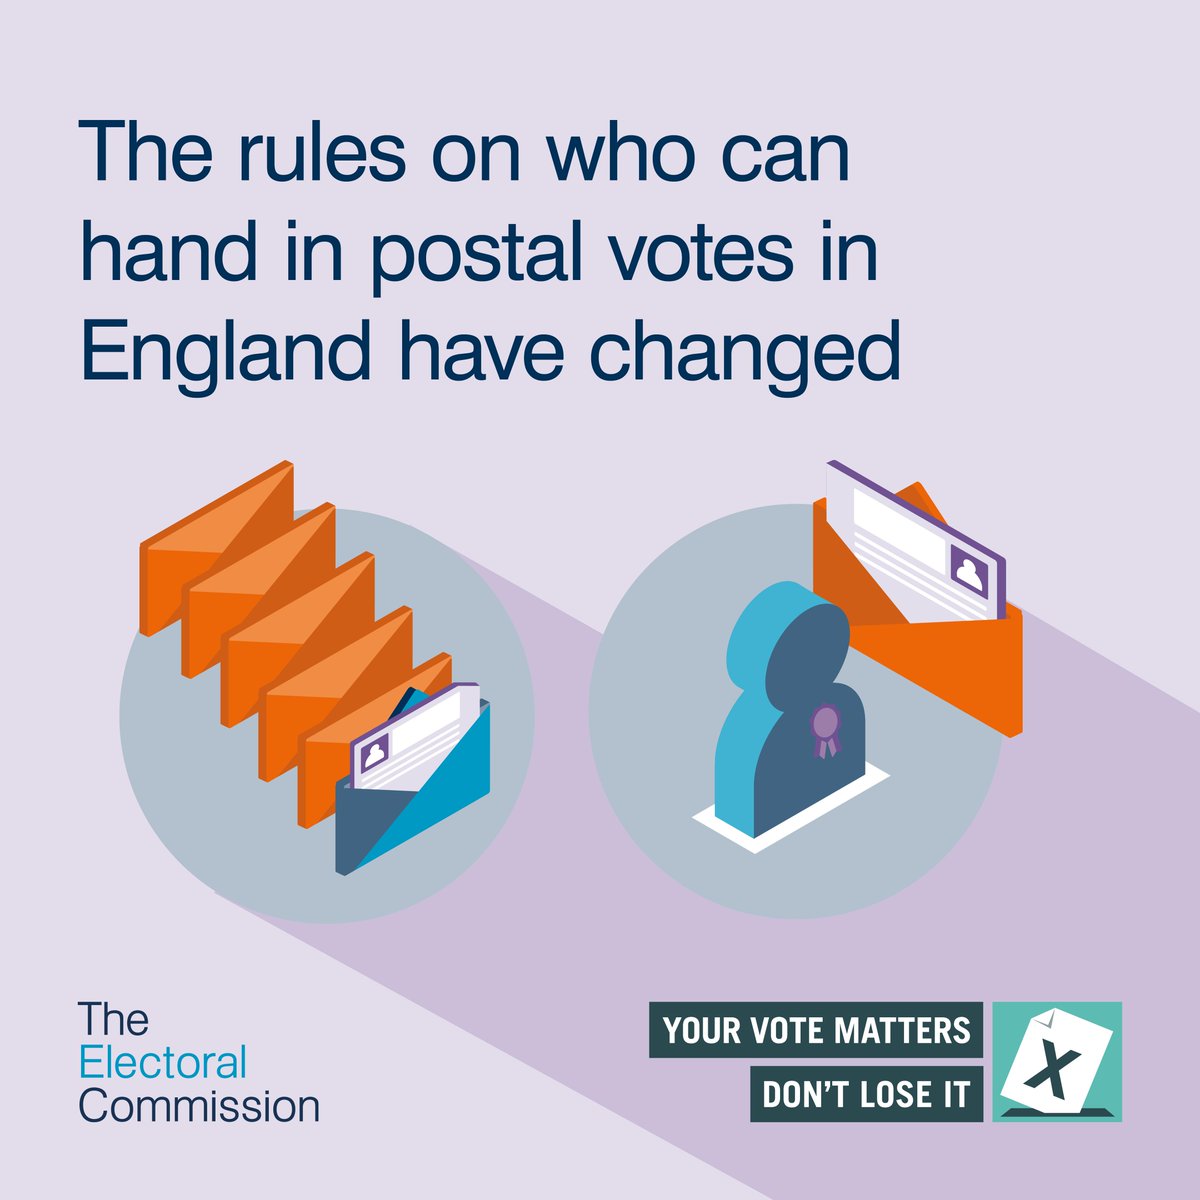 Handing in postal votes at a polling station? You can now only hand in up to five, plus your own. Find out more: electoralcommission.org.uk/waystovote